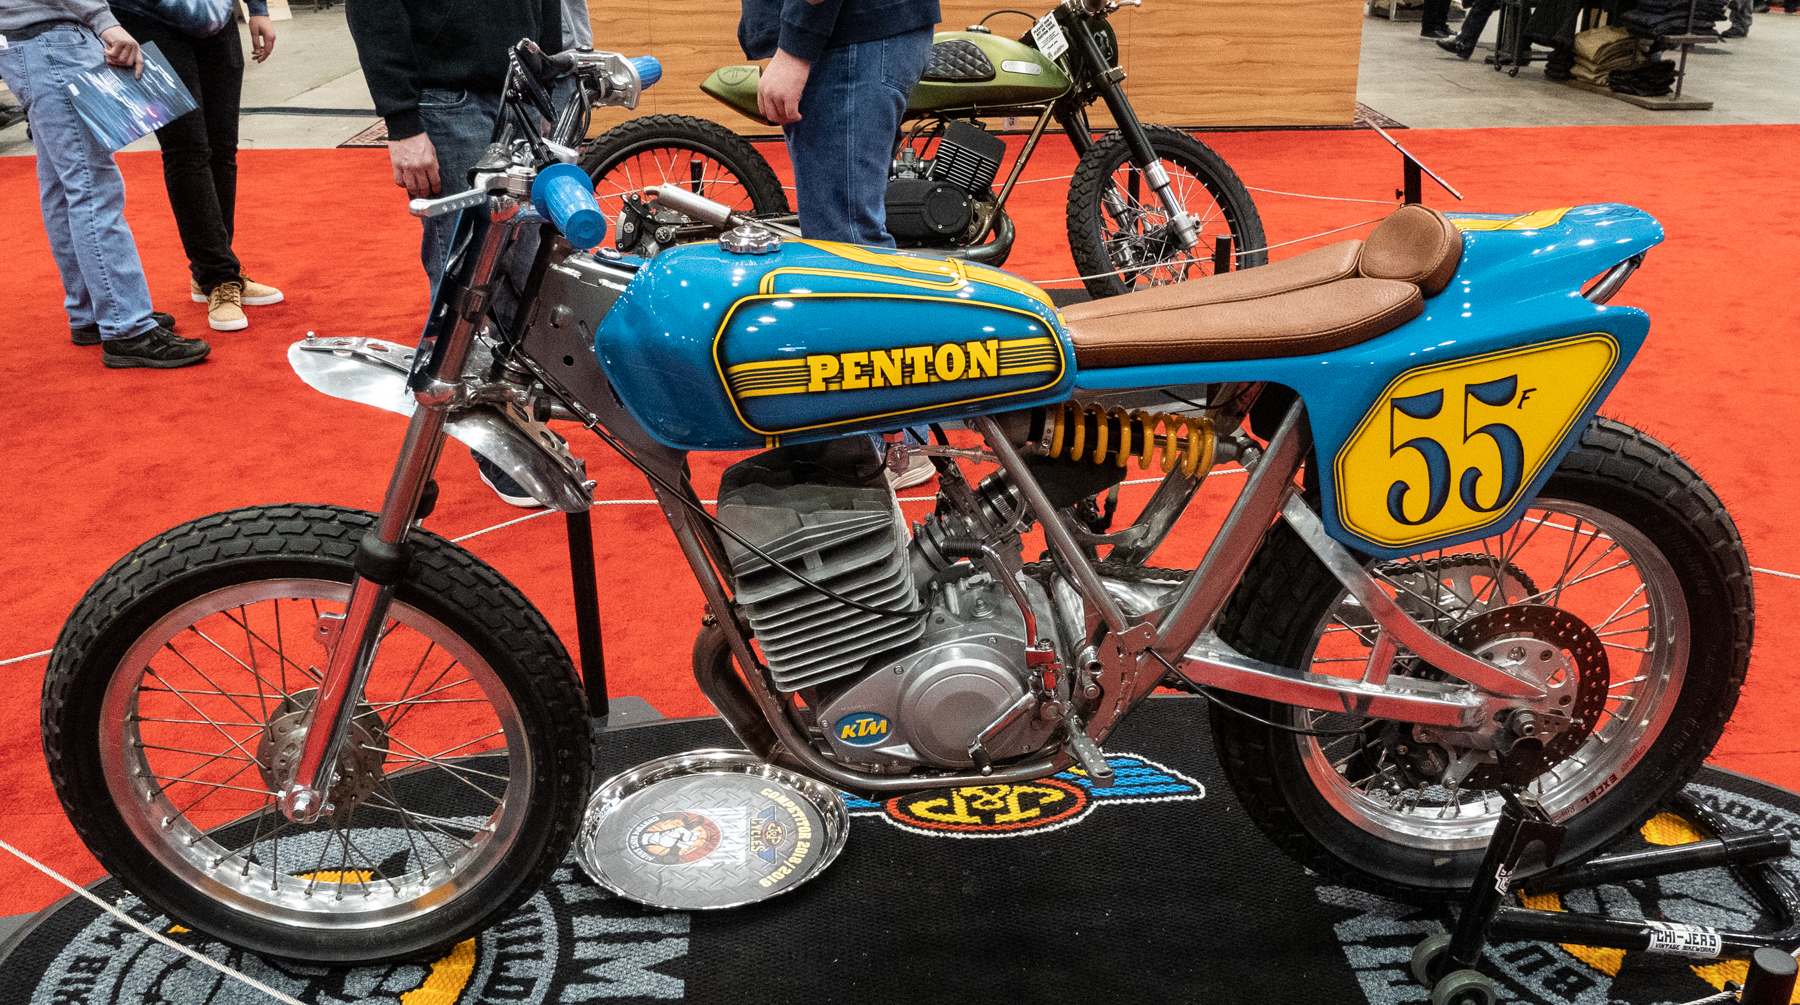 cleveland motorcycle show10 International Motorcycle Shows 2019 in Cleveland